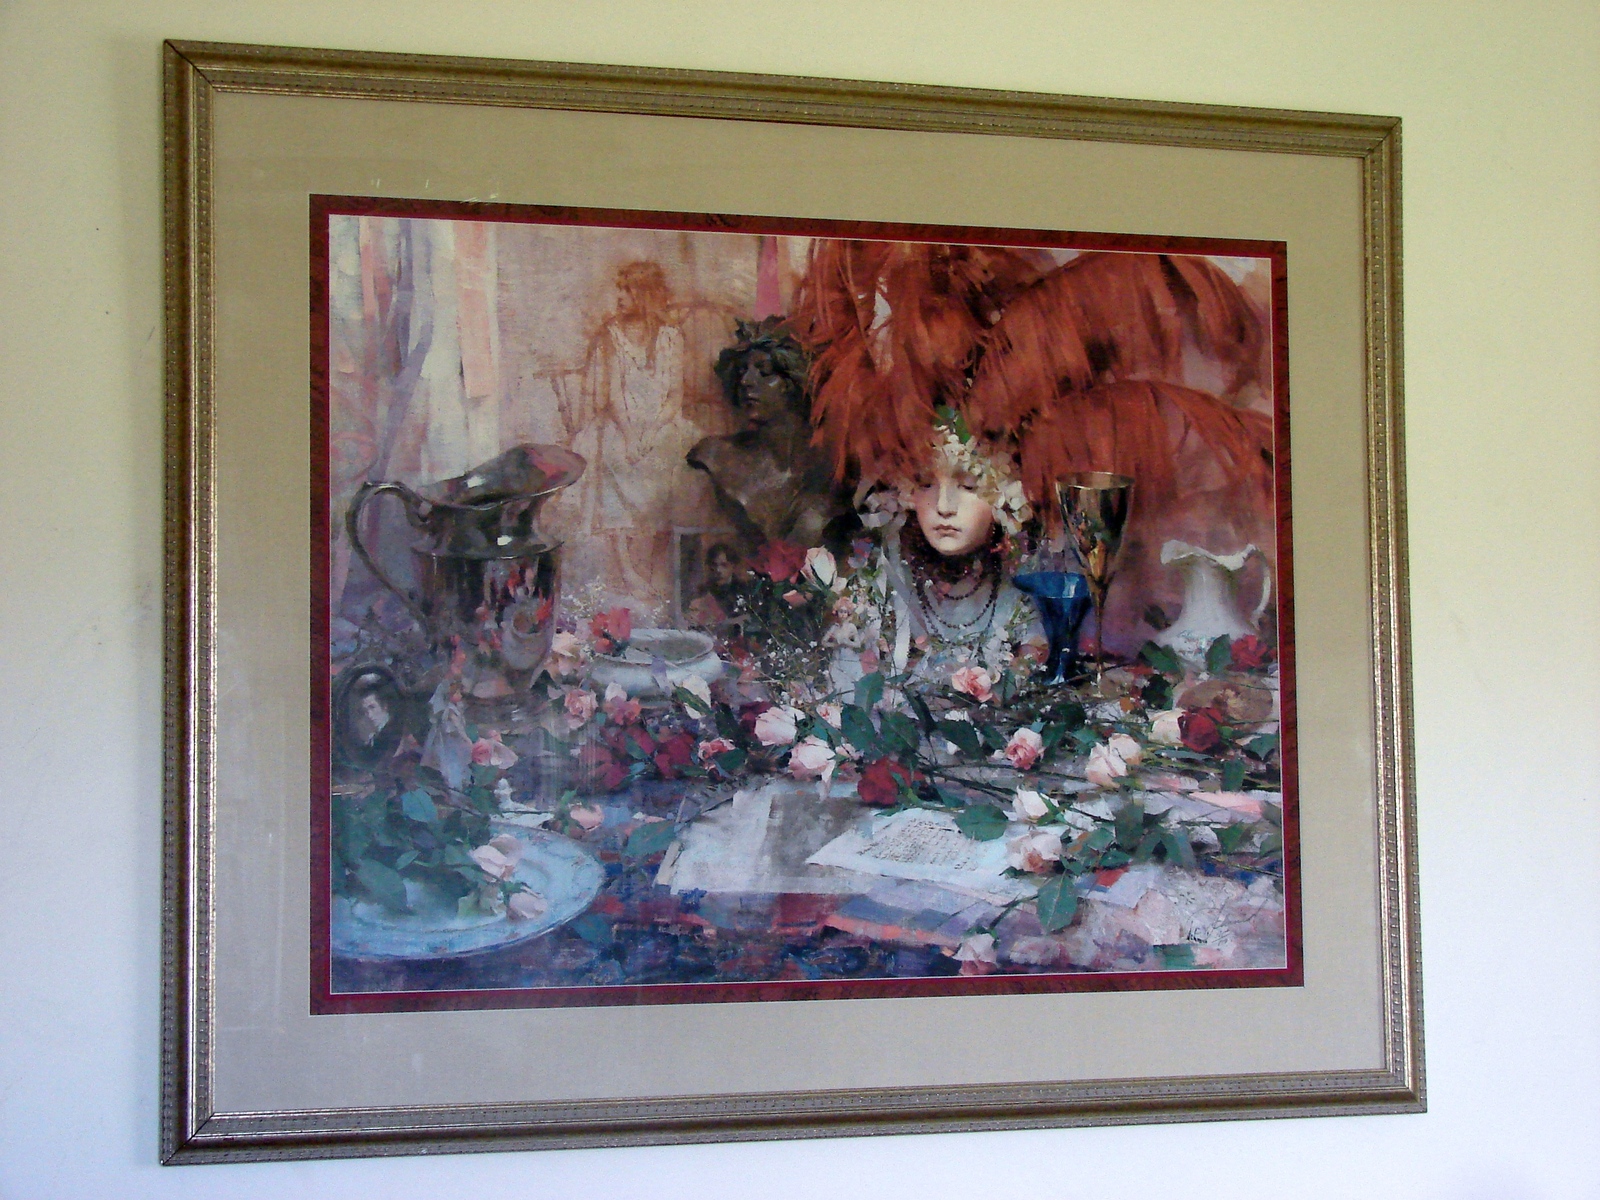 Framed and Matted Ltd Edition  Print by Richard Schmid , "Memories"	 - $425.00